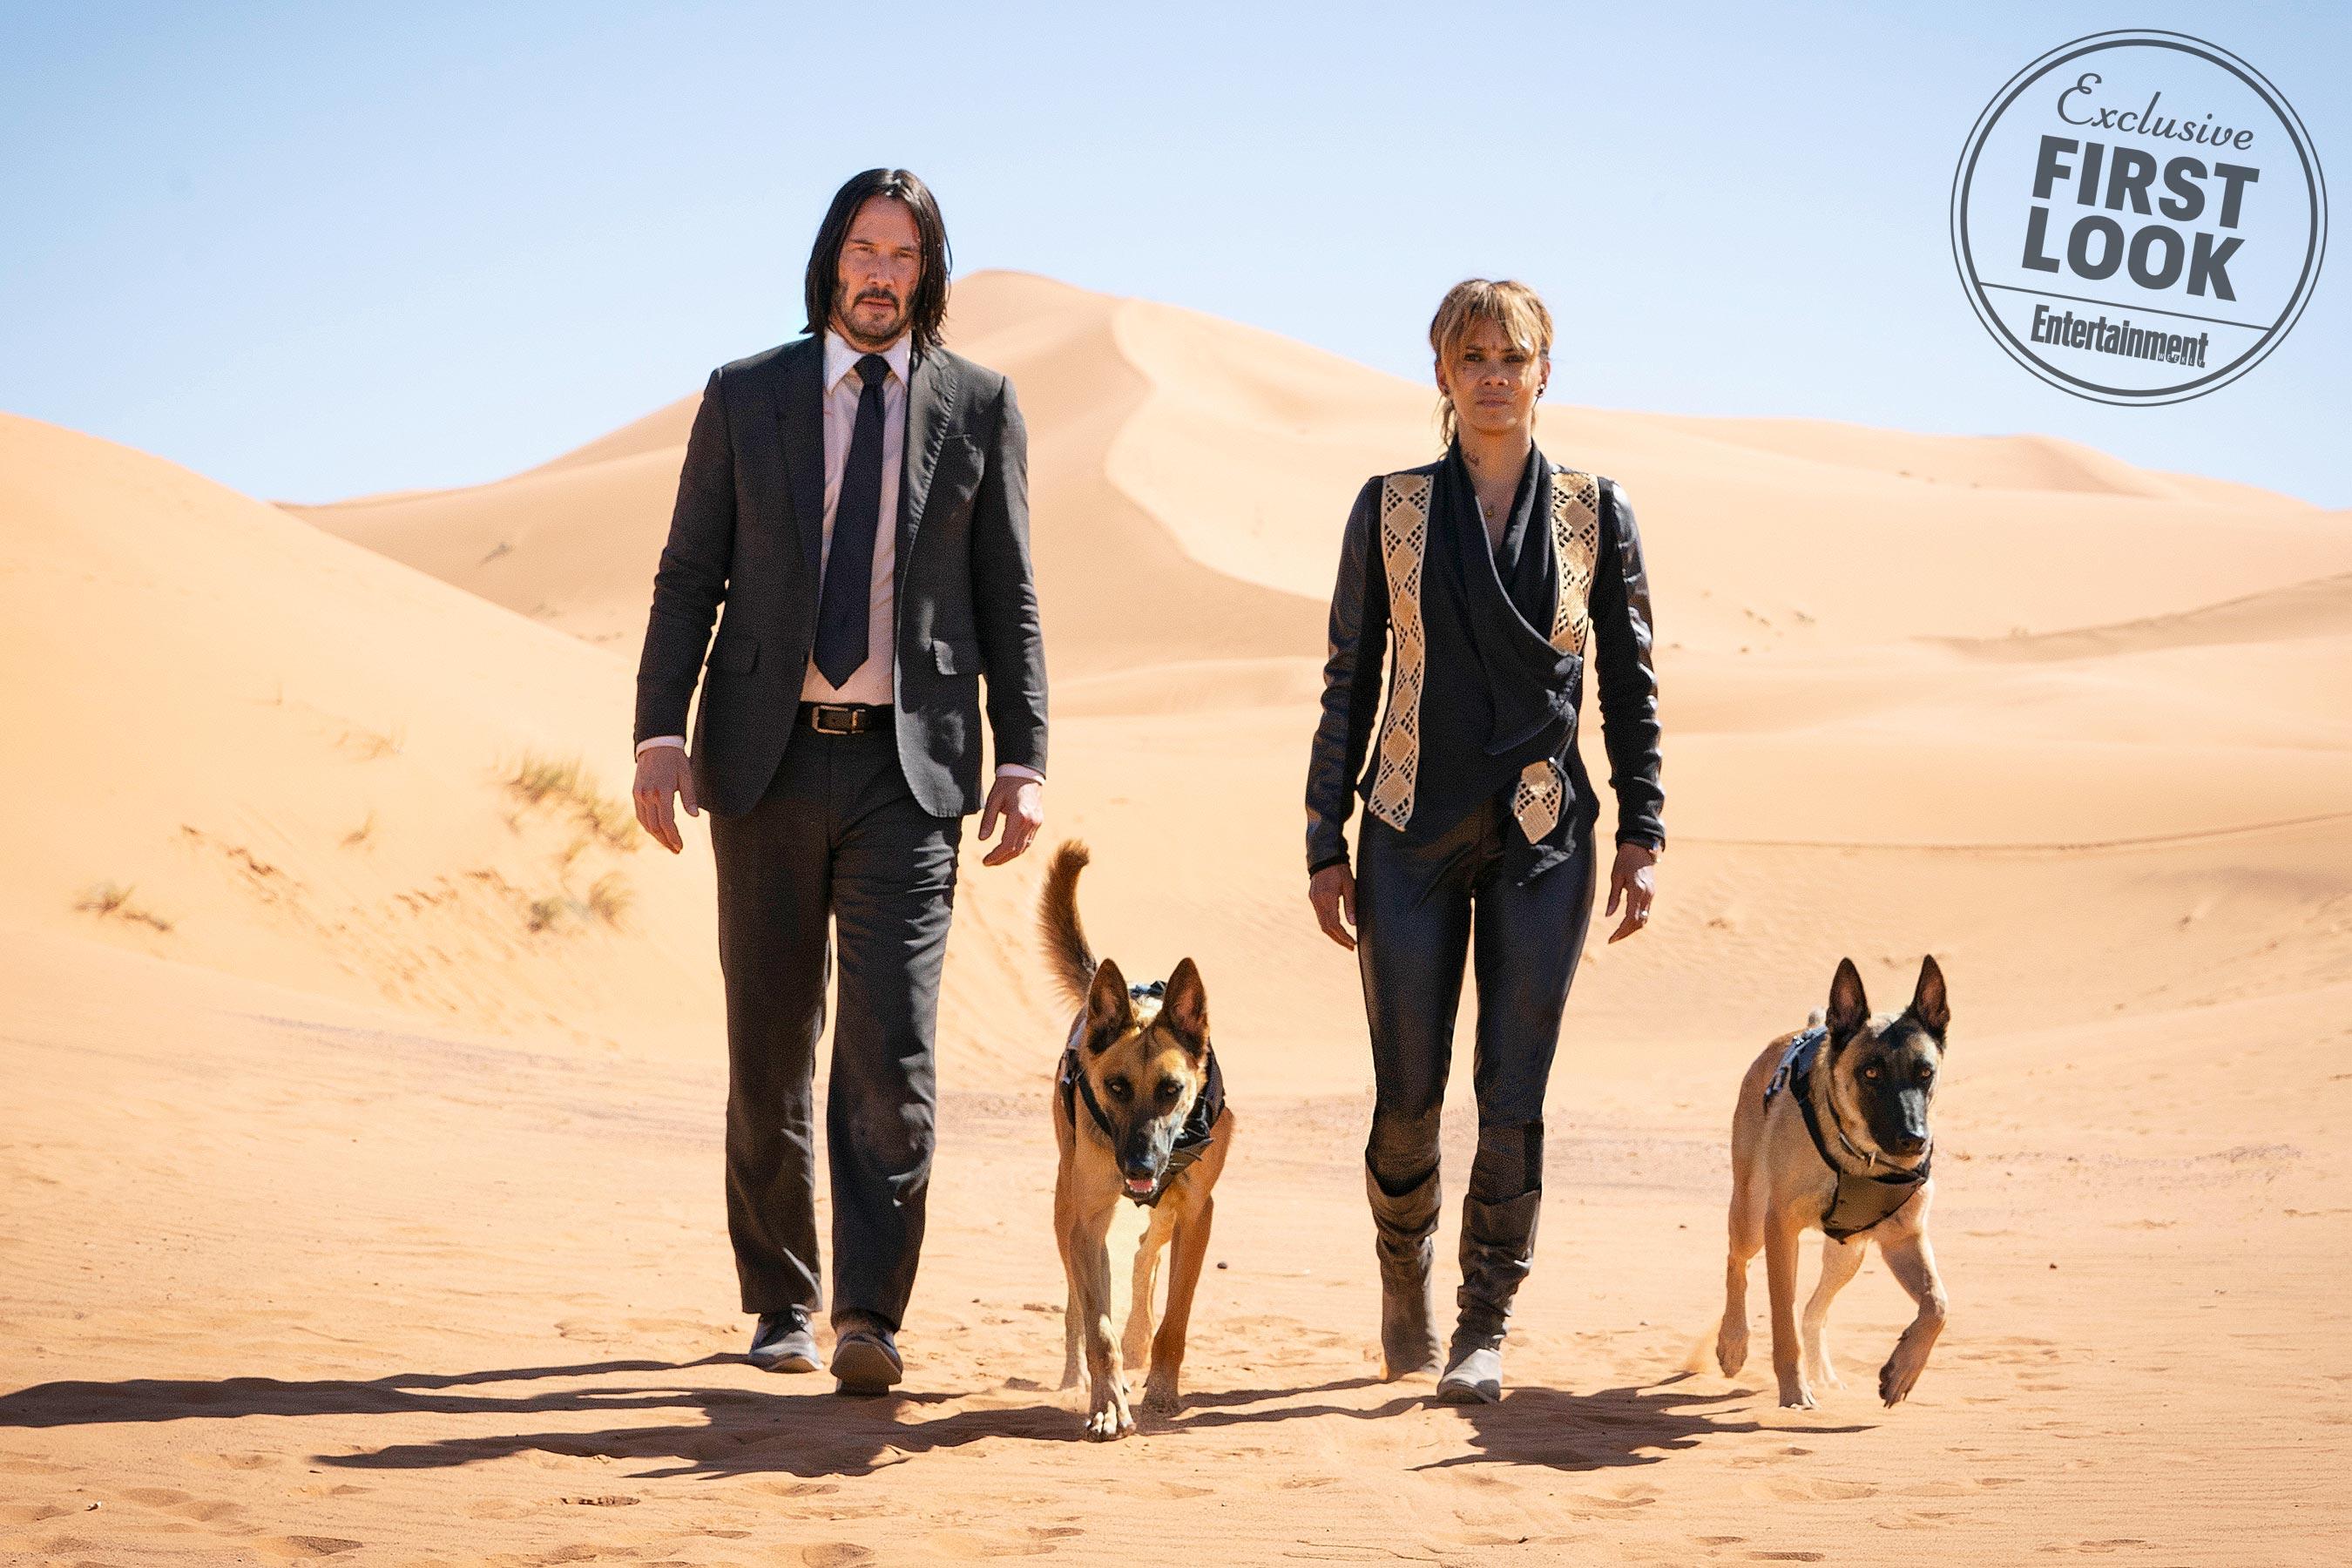 John Wick 3: New Image Feature Keanu Reeves and Halle Berry